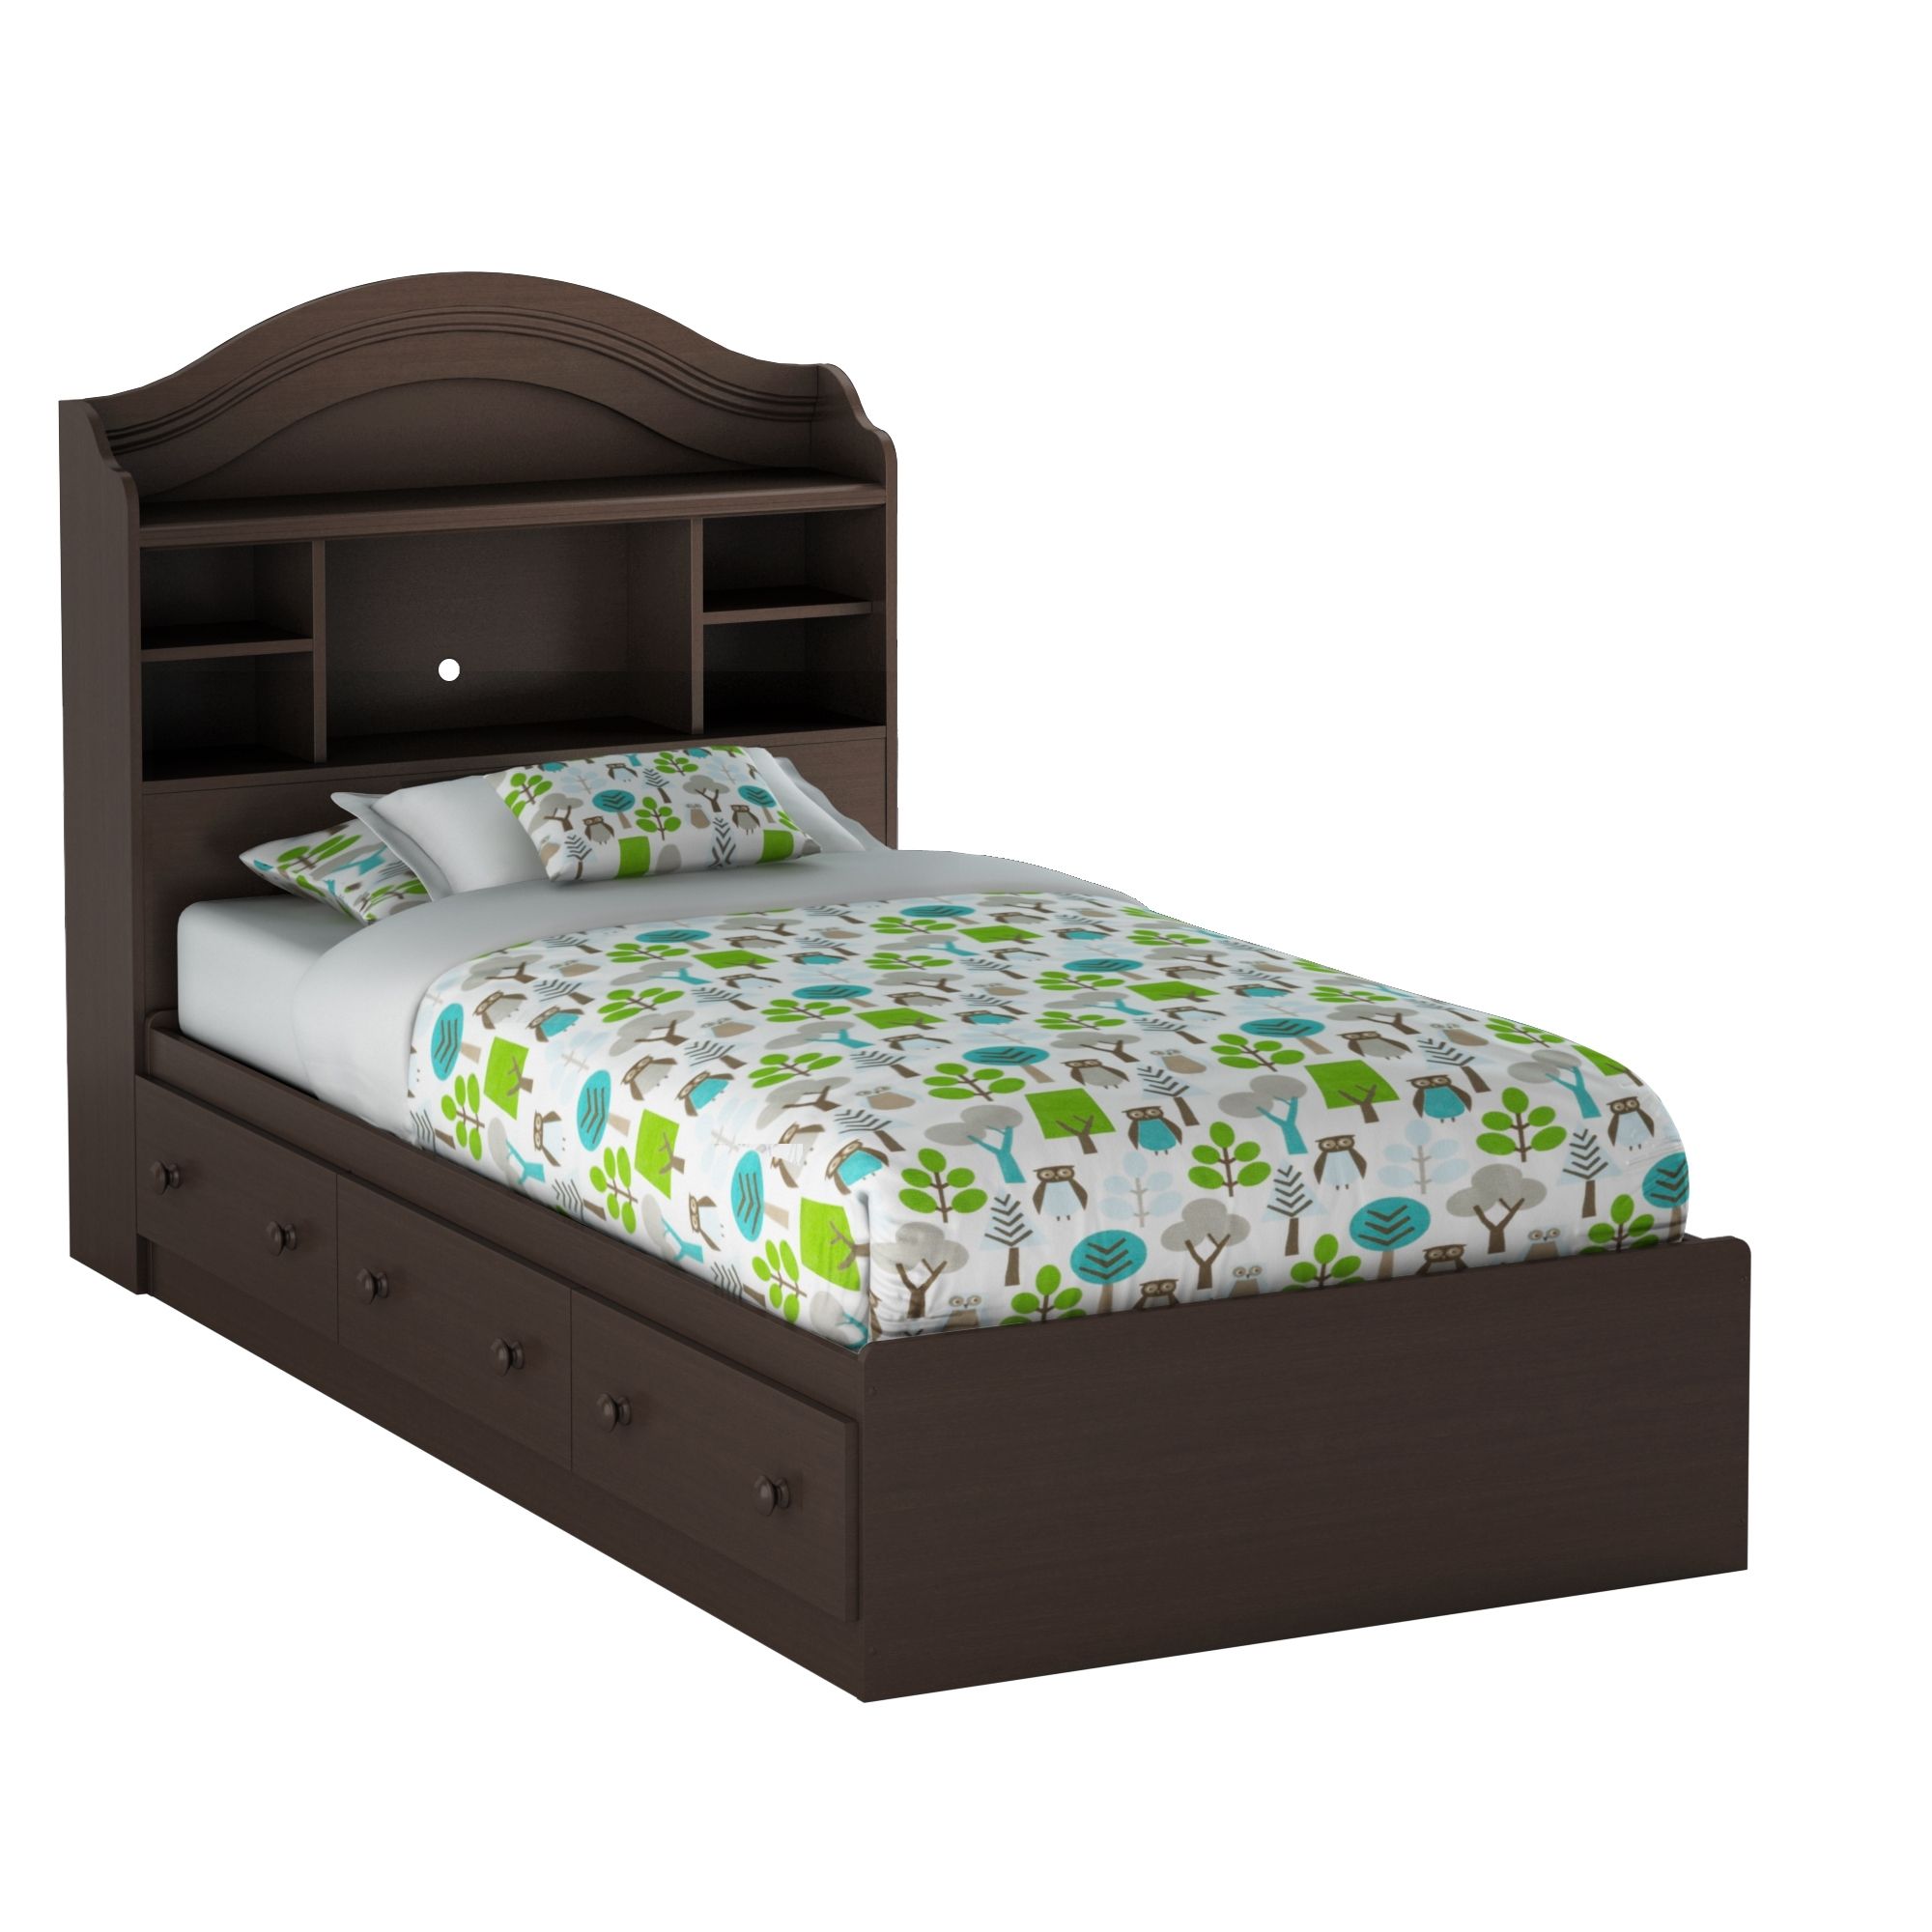 Twin Bed With Bookcases Headboard For Well Liked South Shore Summer Breeze Twin Bookcase Headboard, 39'', Multiple (View 11 of 15)